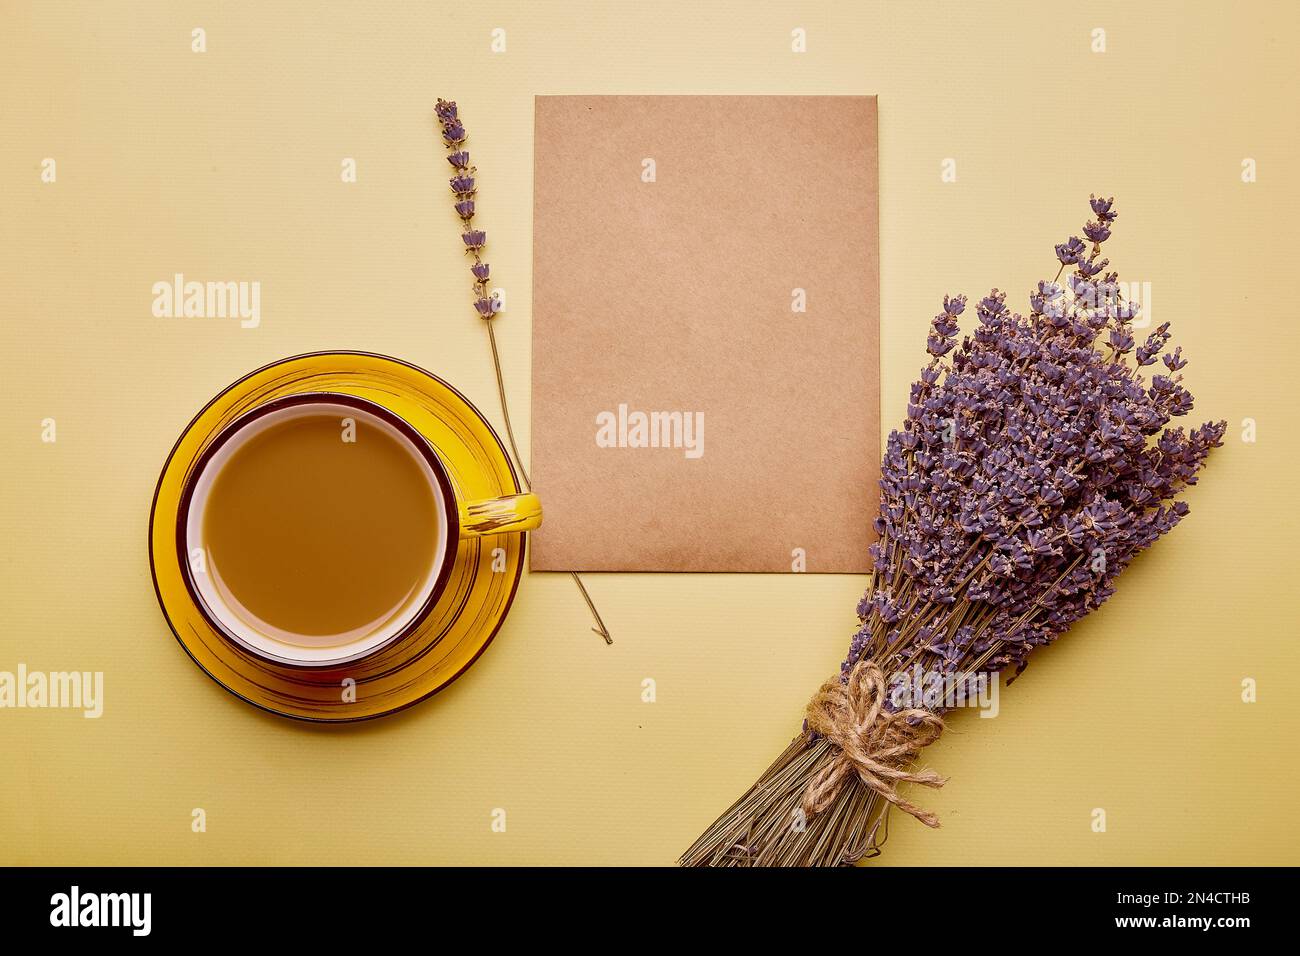 Mock up of envelope, crafting card with cup of coffee and lavender. Aesthetics flat lay Stock Photo